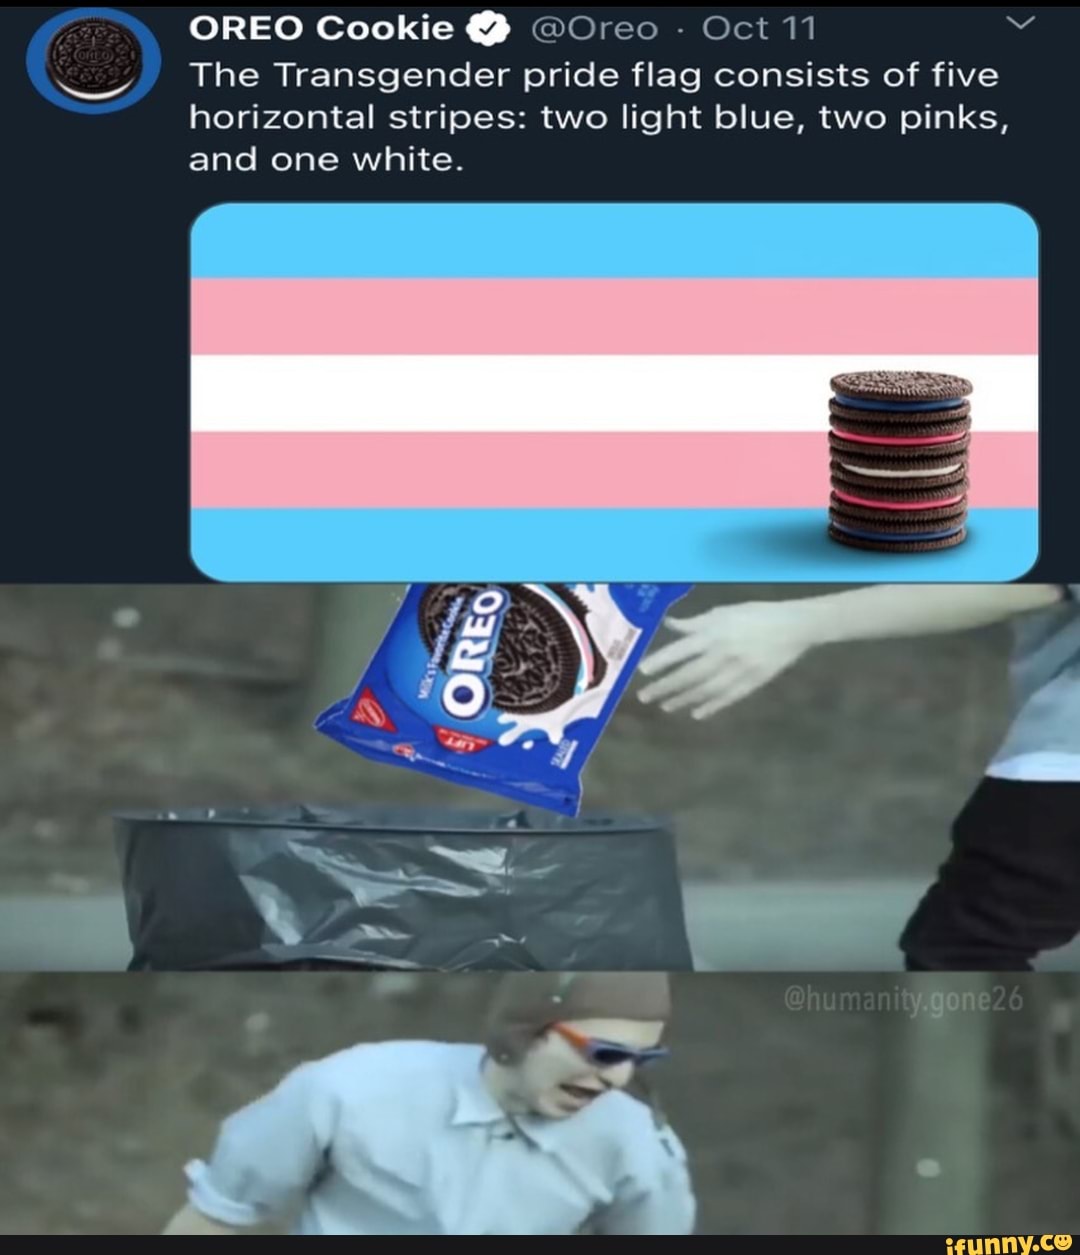 OREO Cookie on X: The Transgender pride flag consists of five